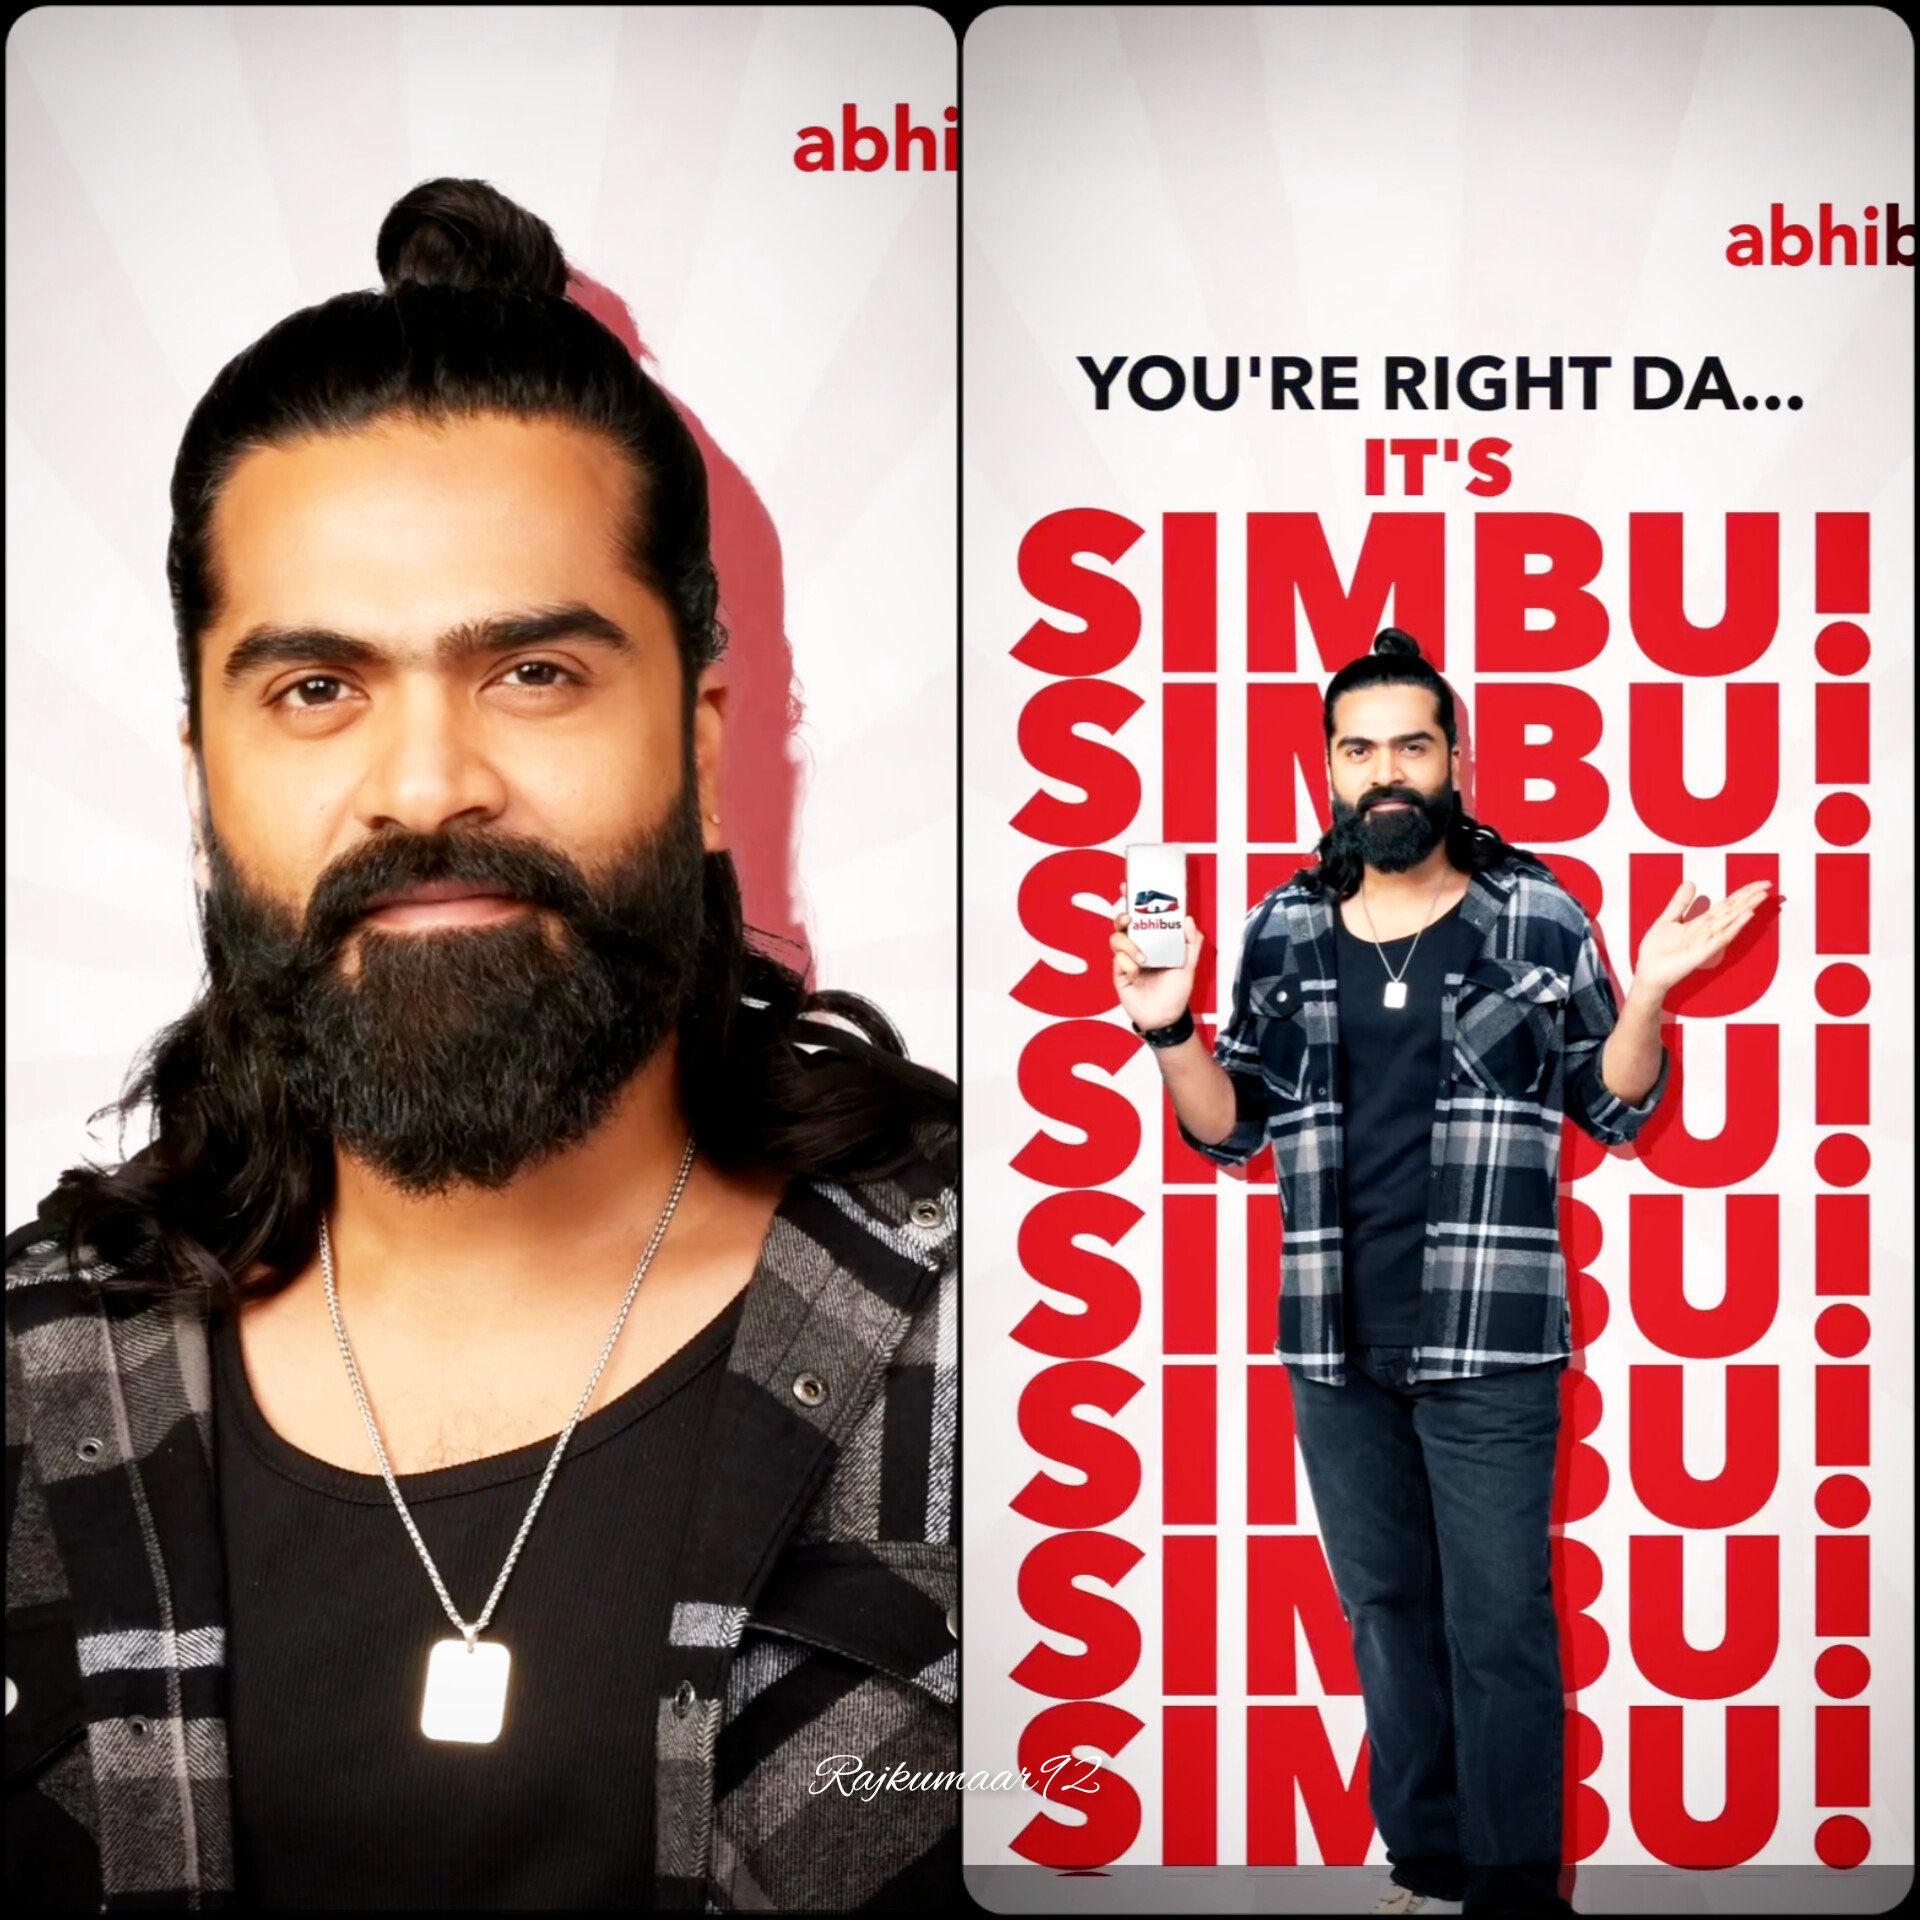 Breaking! Simbu to play dual roles in new movie - Hollywood News -  IndiaGlitz.com